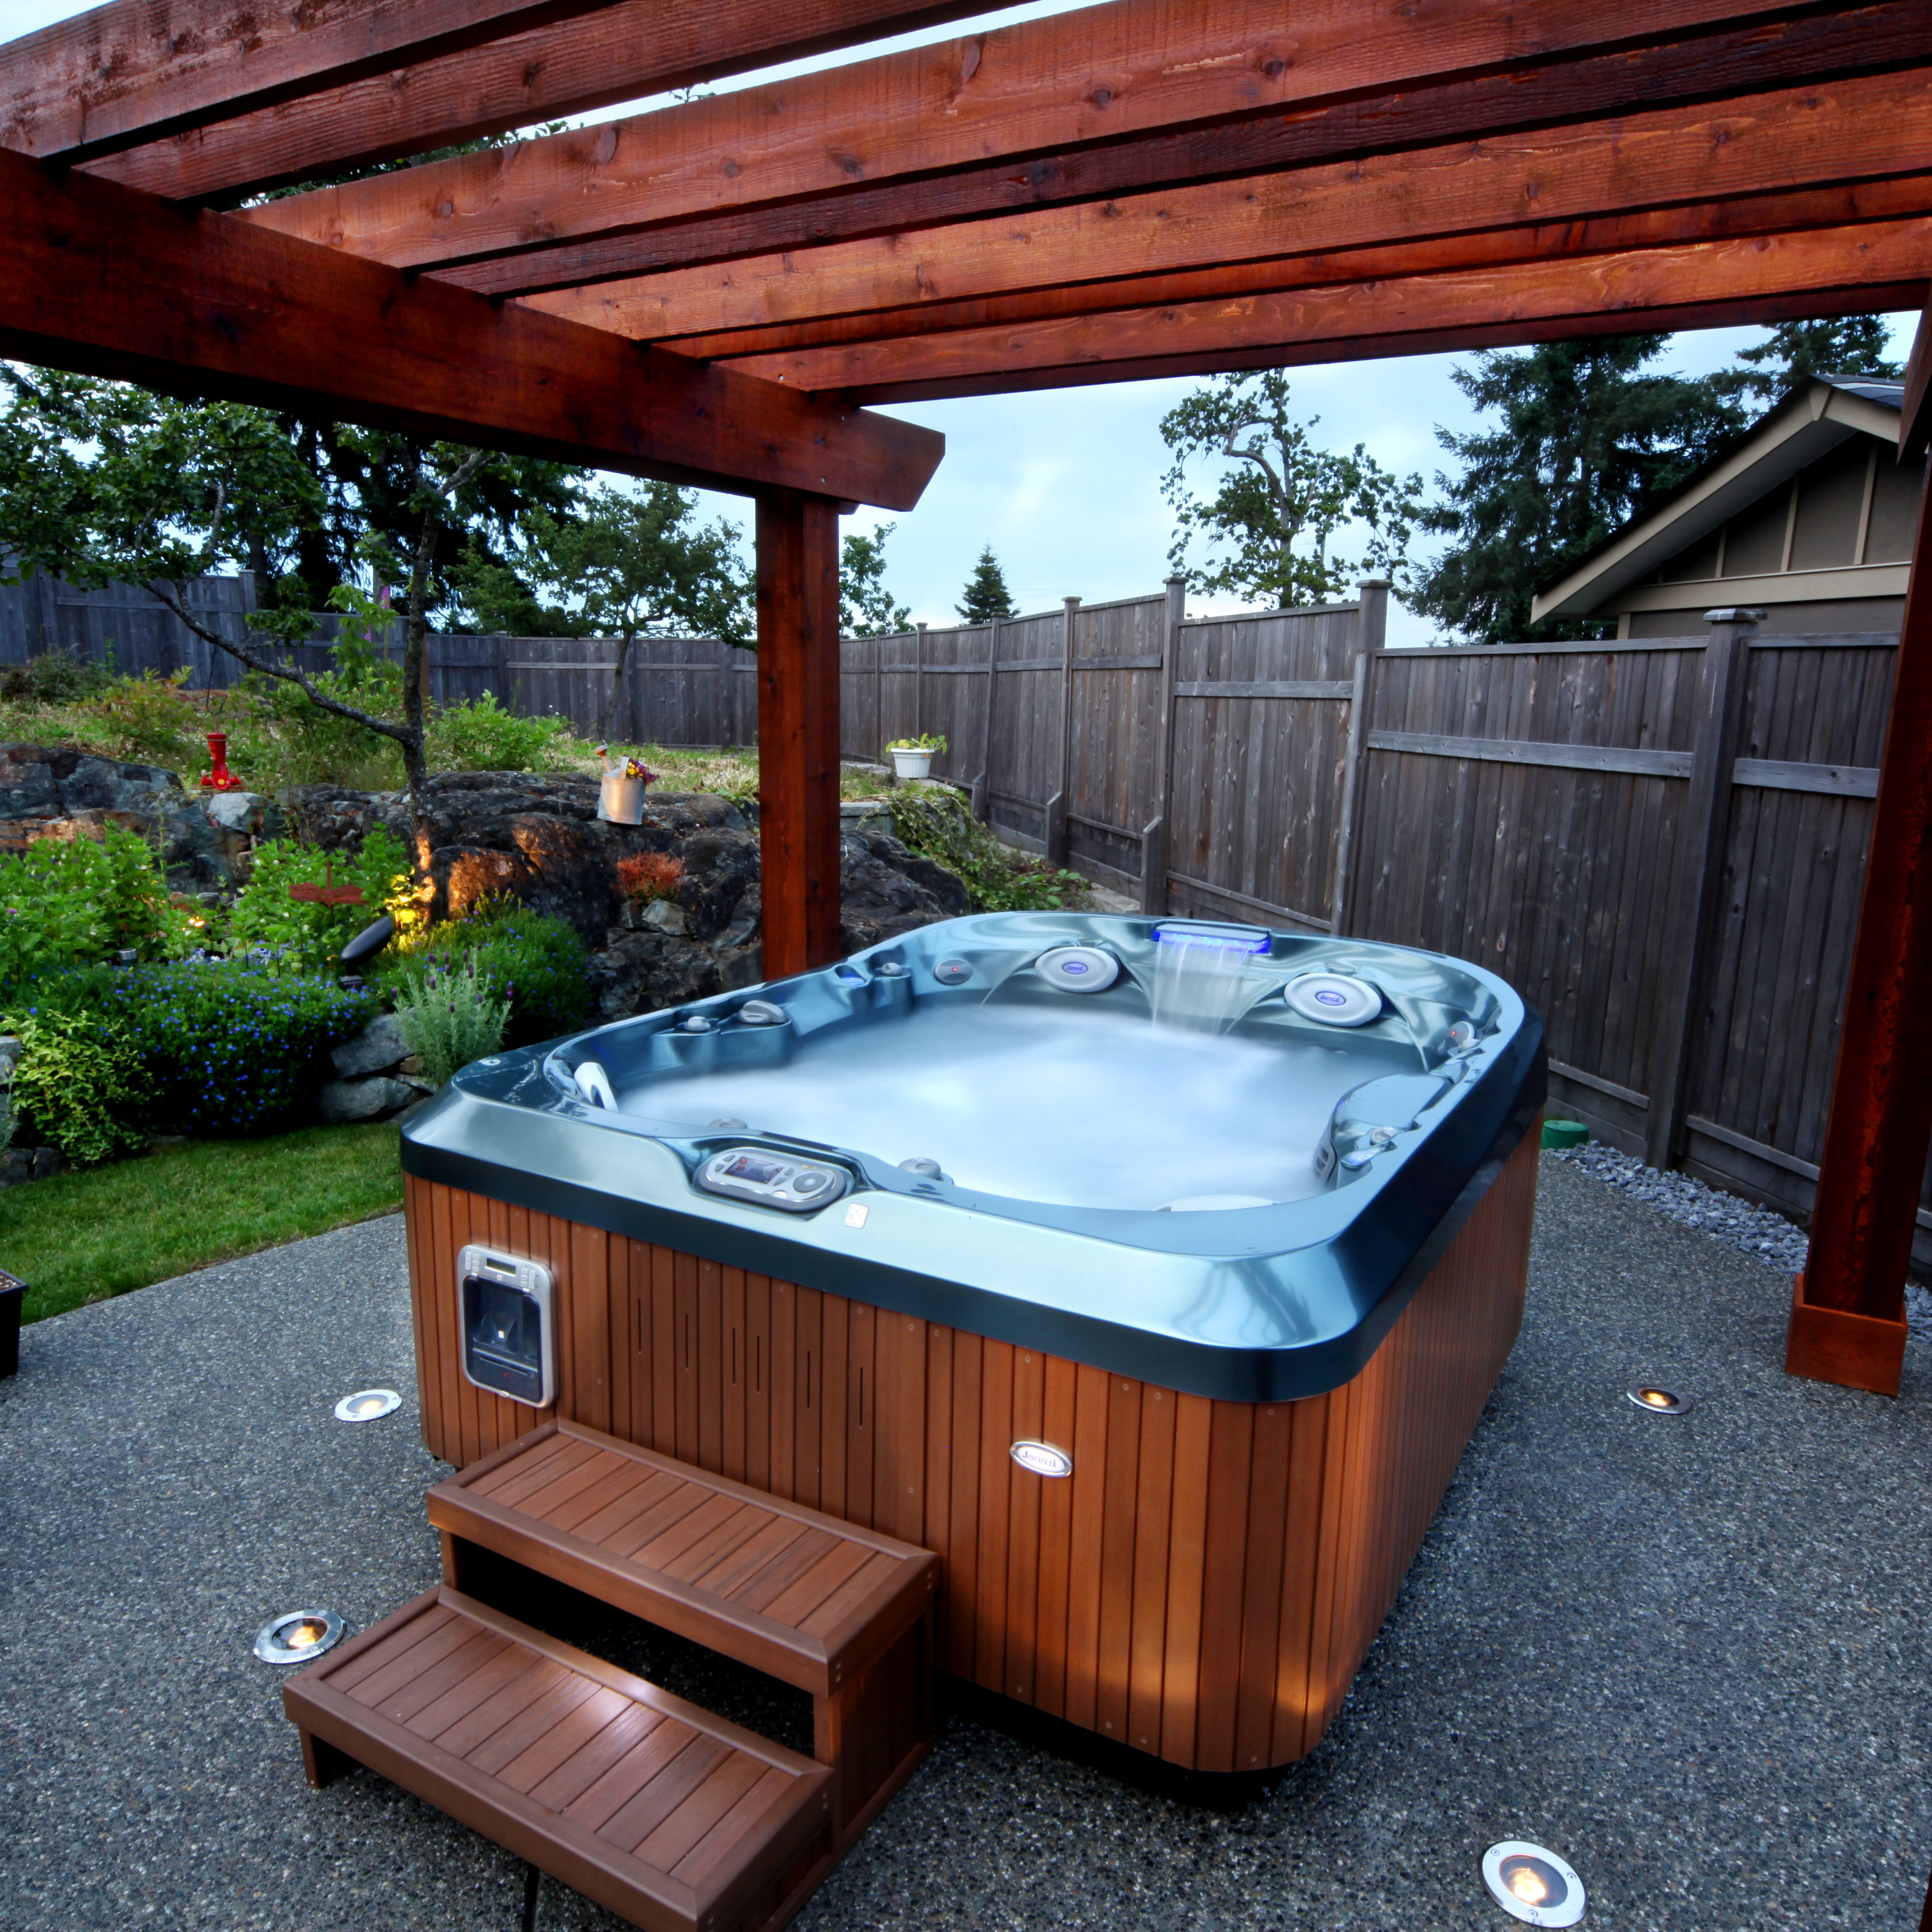 bath tubs come in almost all shapes and sizes, which is considered to be th...